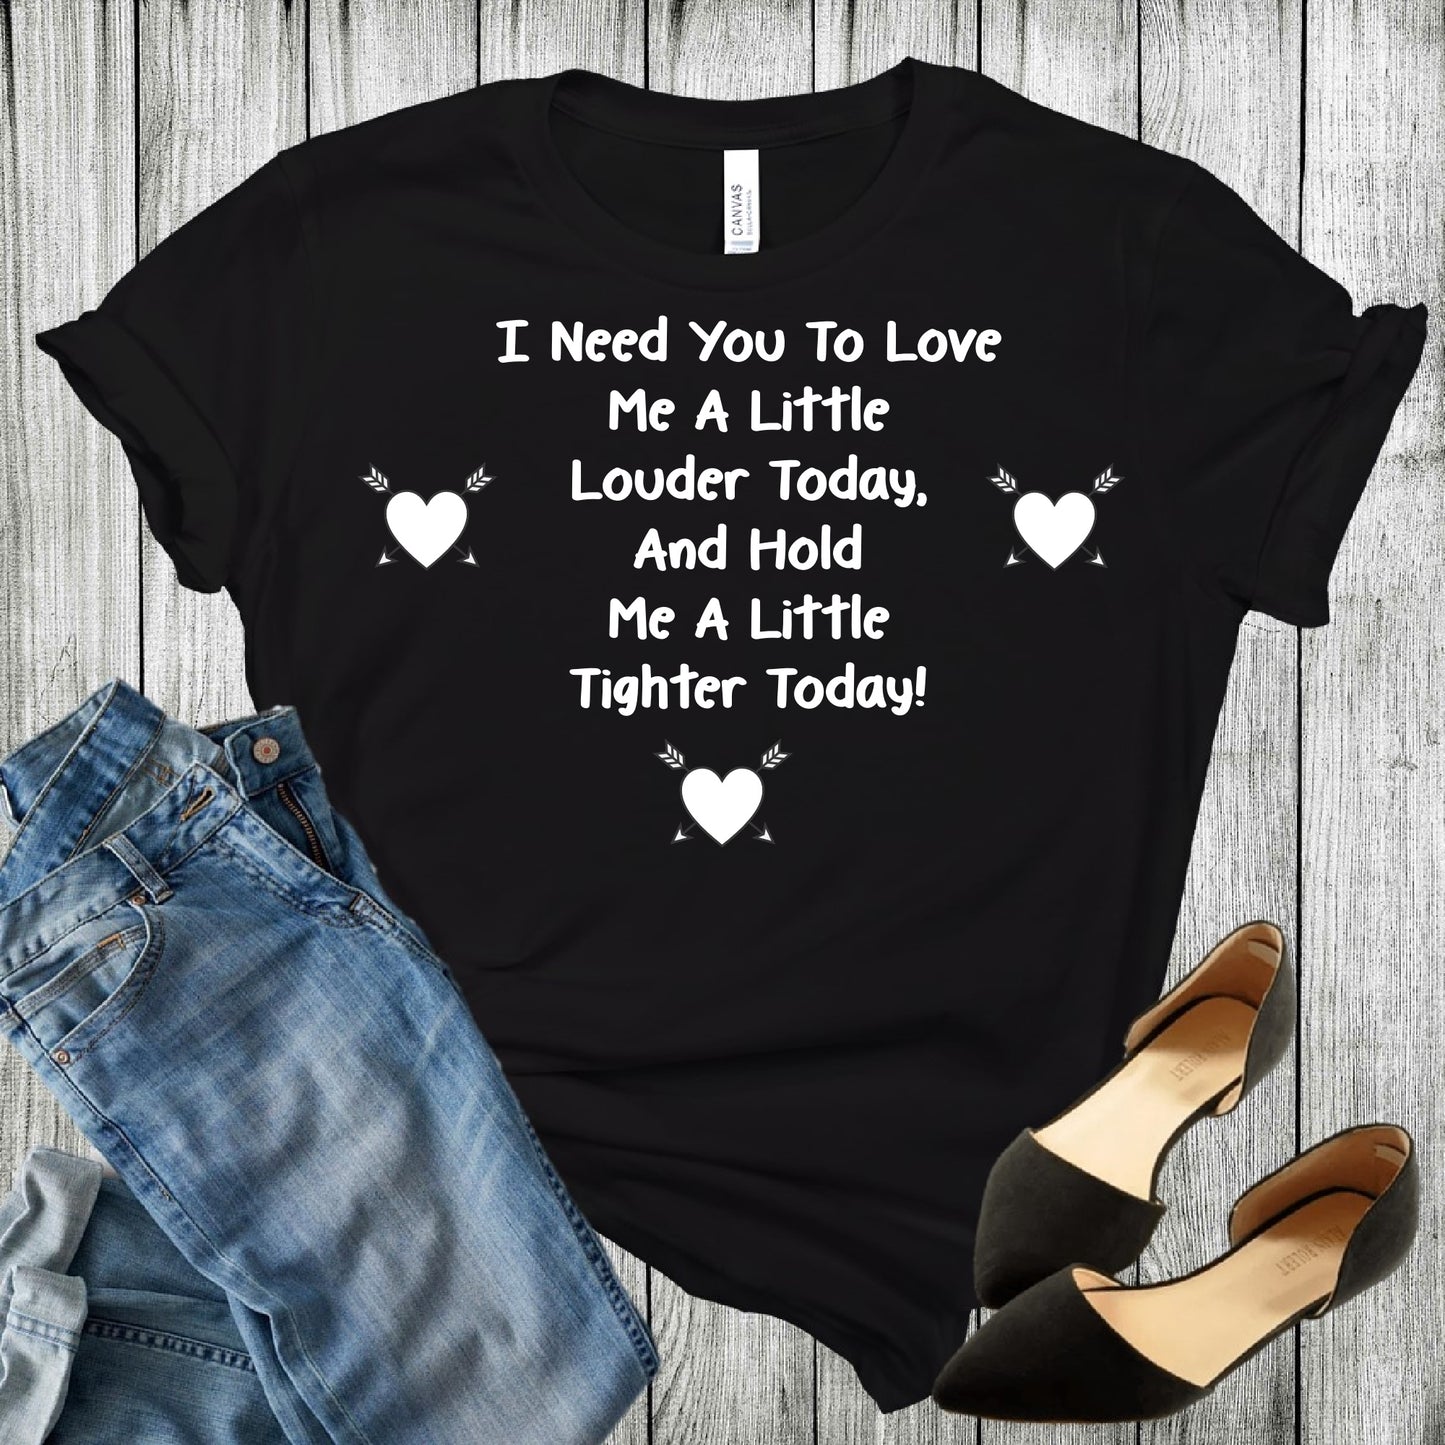 Grit City Reel Black Tshirt with white writing saying I need you to love me a little louder tody, and hold me a little tighter today! sizing small to 3X